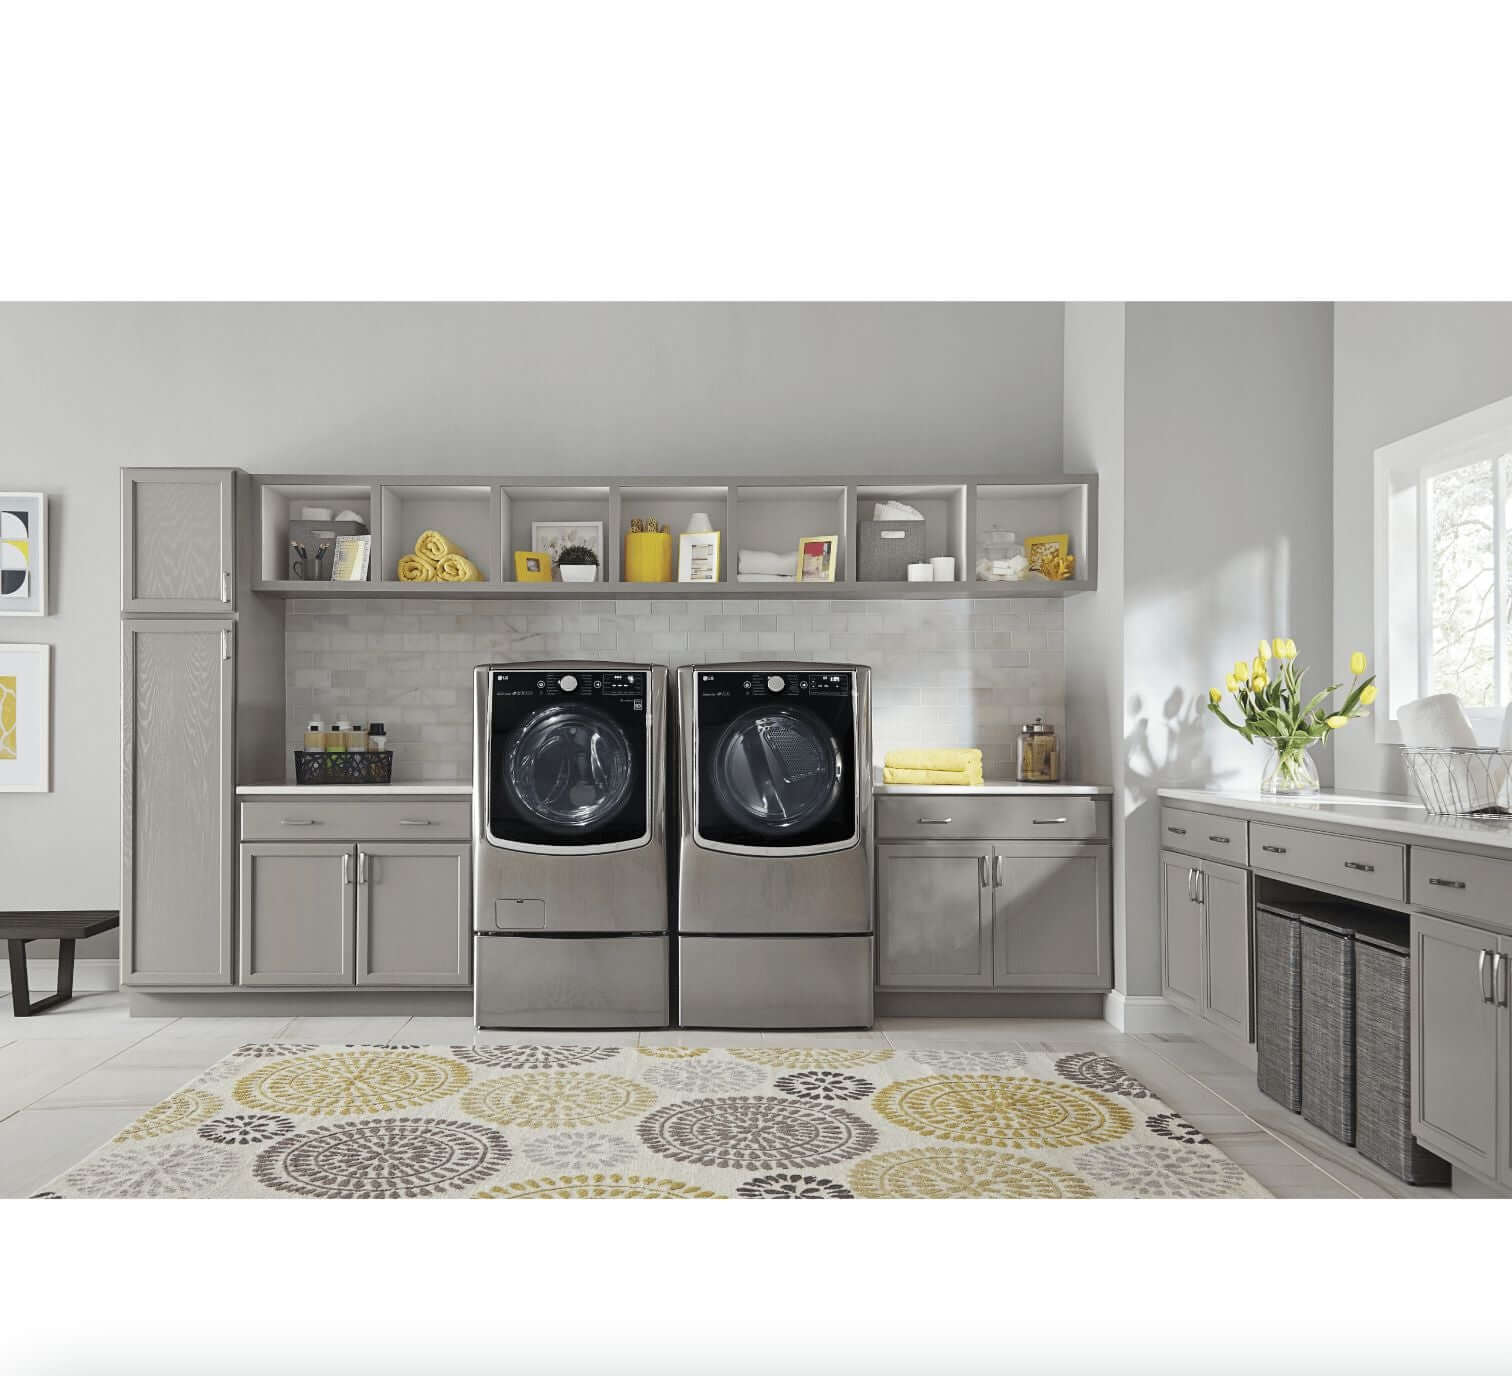 LG 29 Inch Ultra Large Capacity Electric Dryer in Graphite Steel 9 cu. ft. (DLEX9000V)